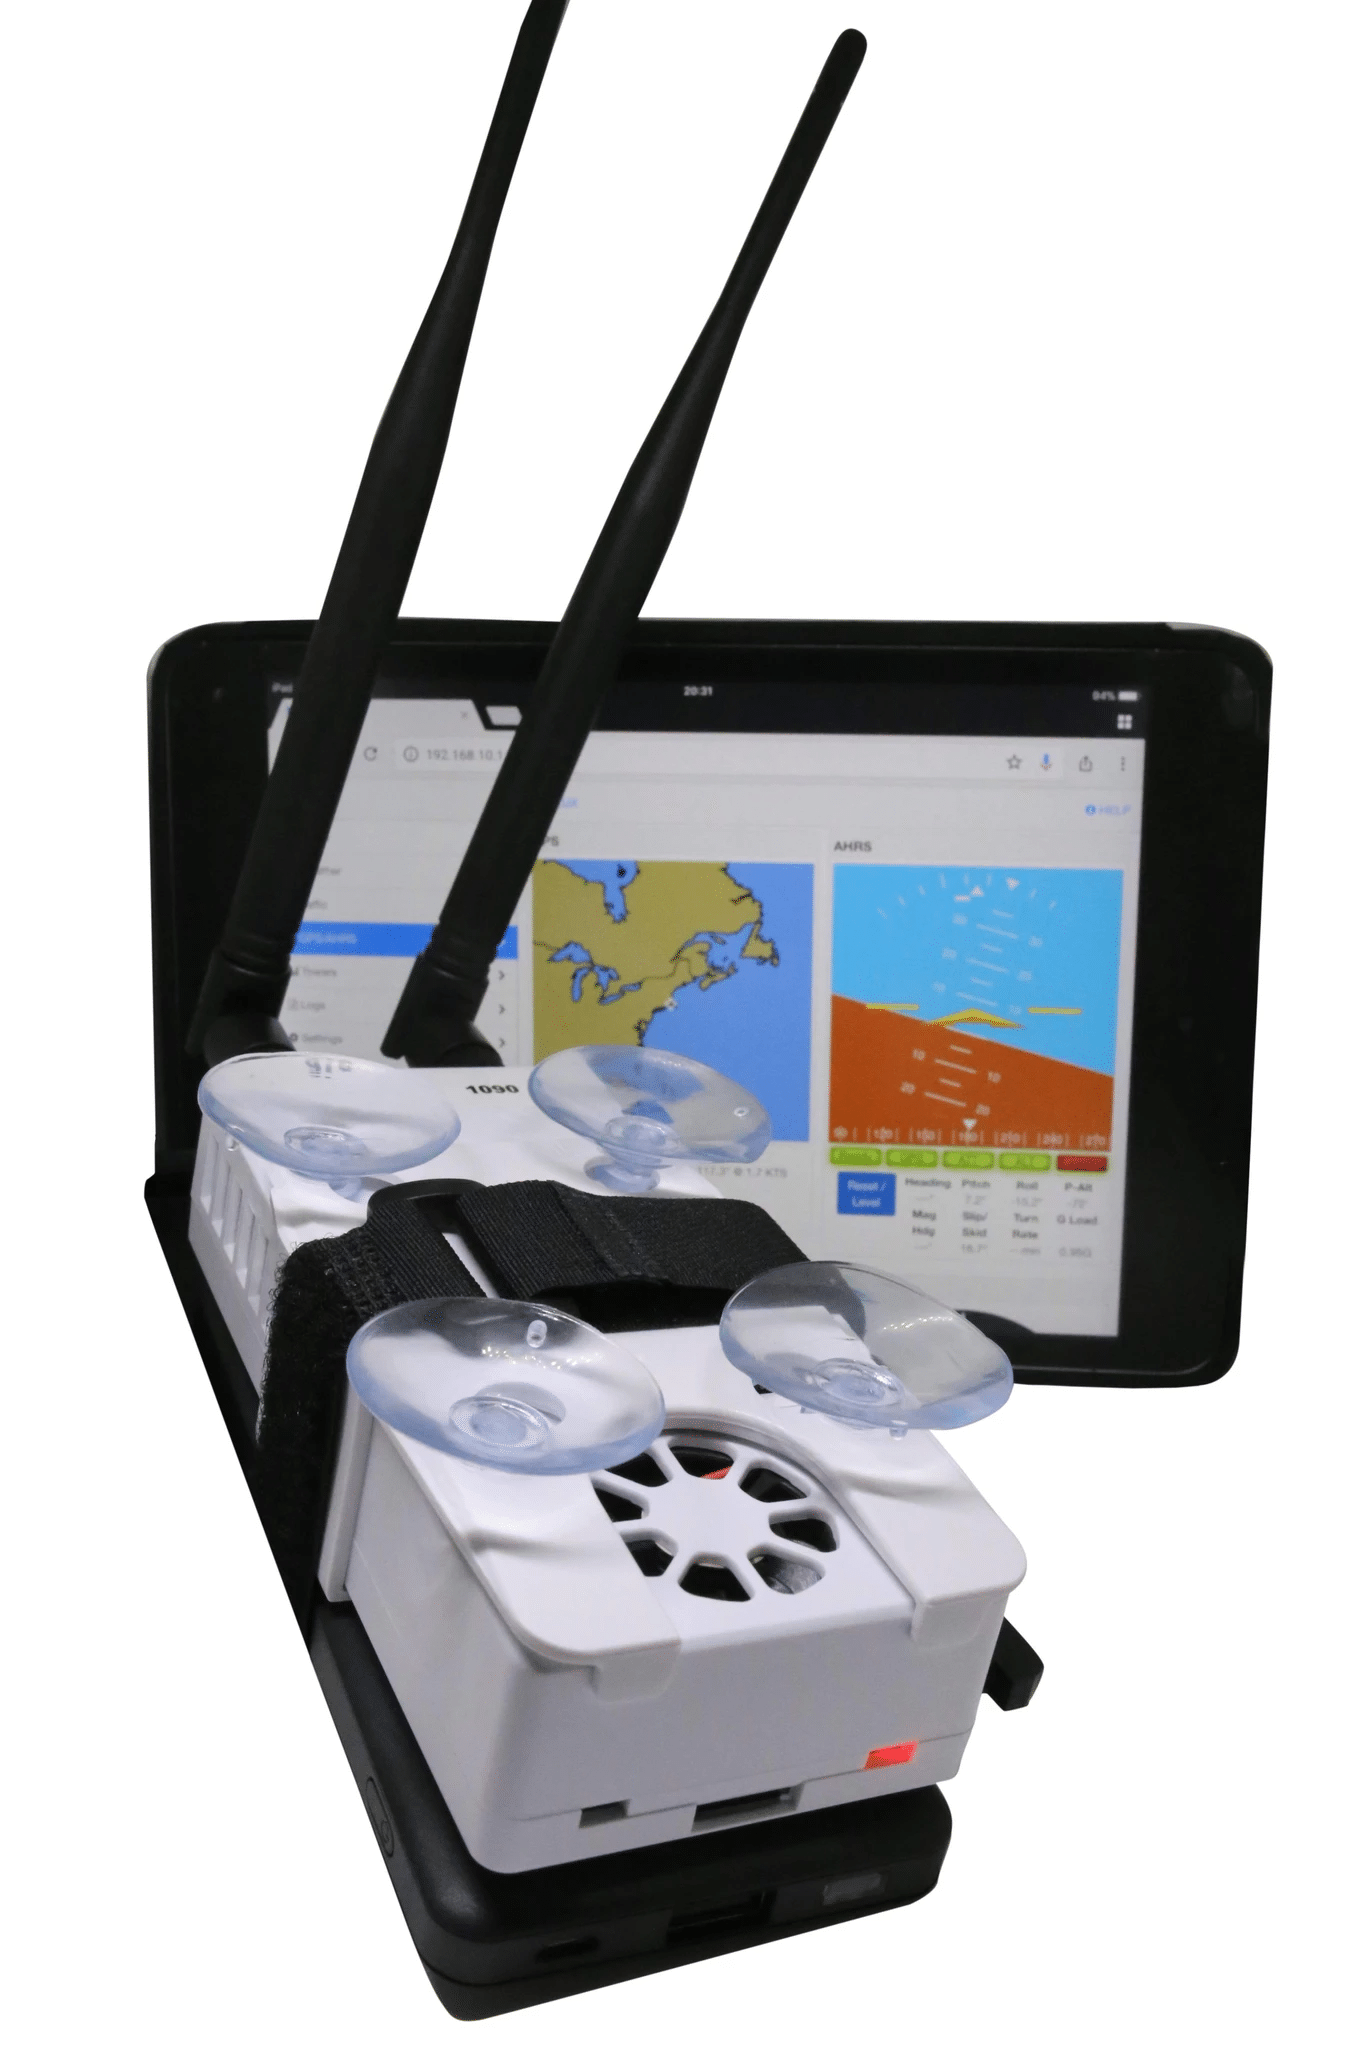 RXWX Dual Band ADS-B Receiver Pre-built and Powered by Stratux software